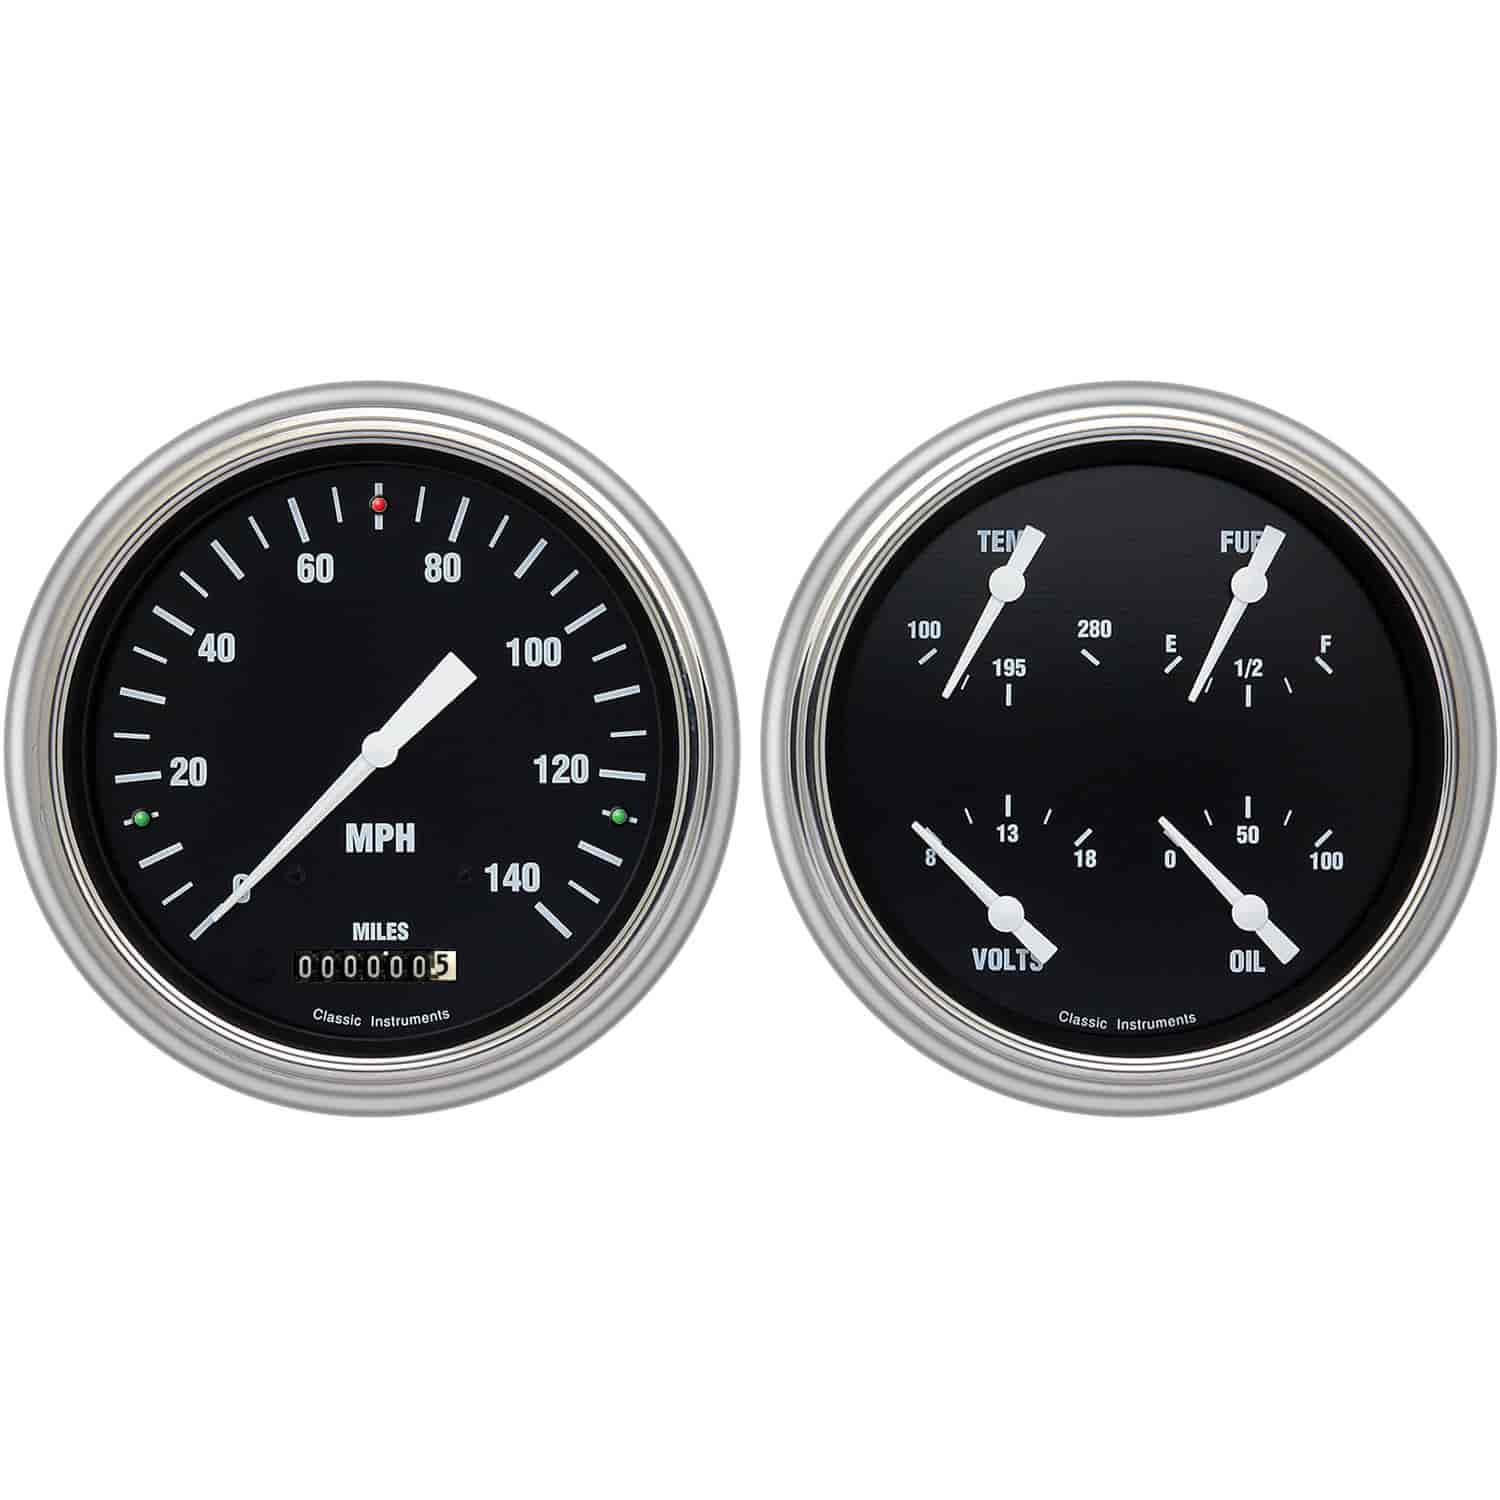 Hot Rod Series Gauge Package 1951-52 Chevy Car Includes: